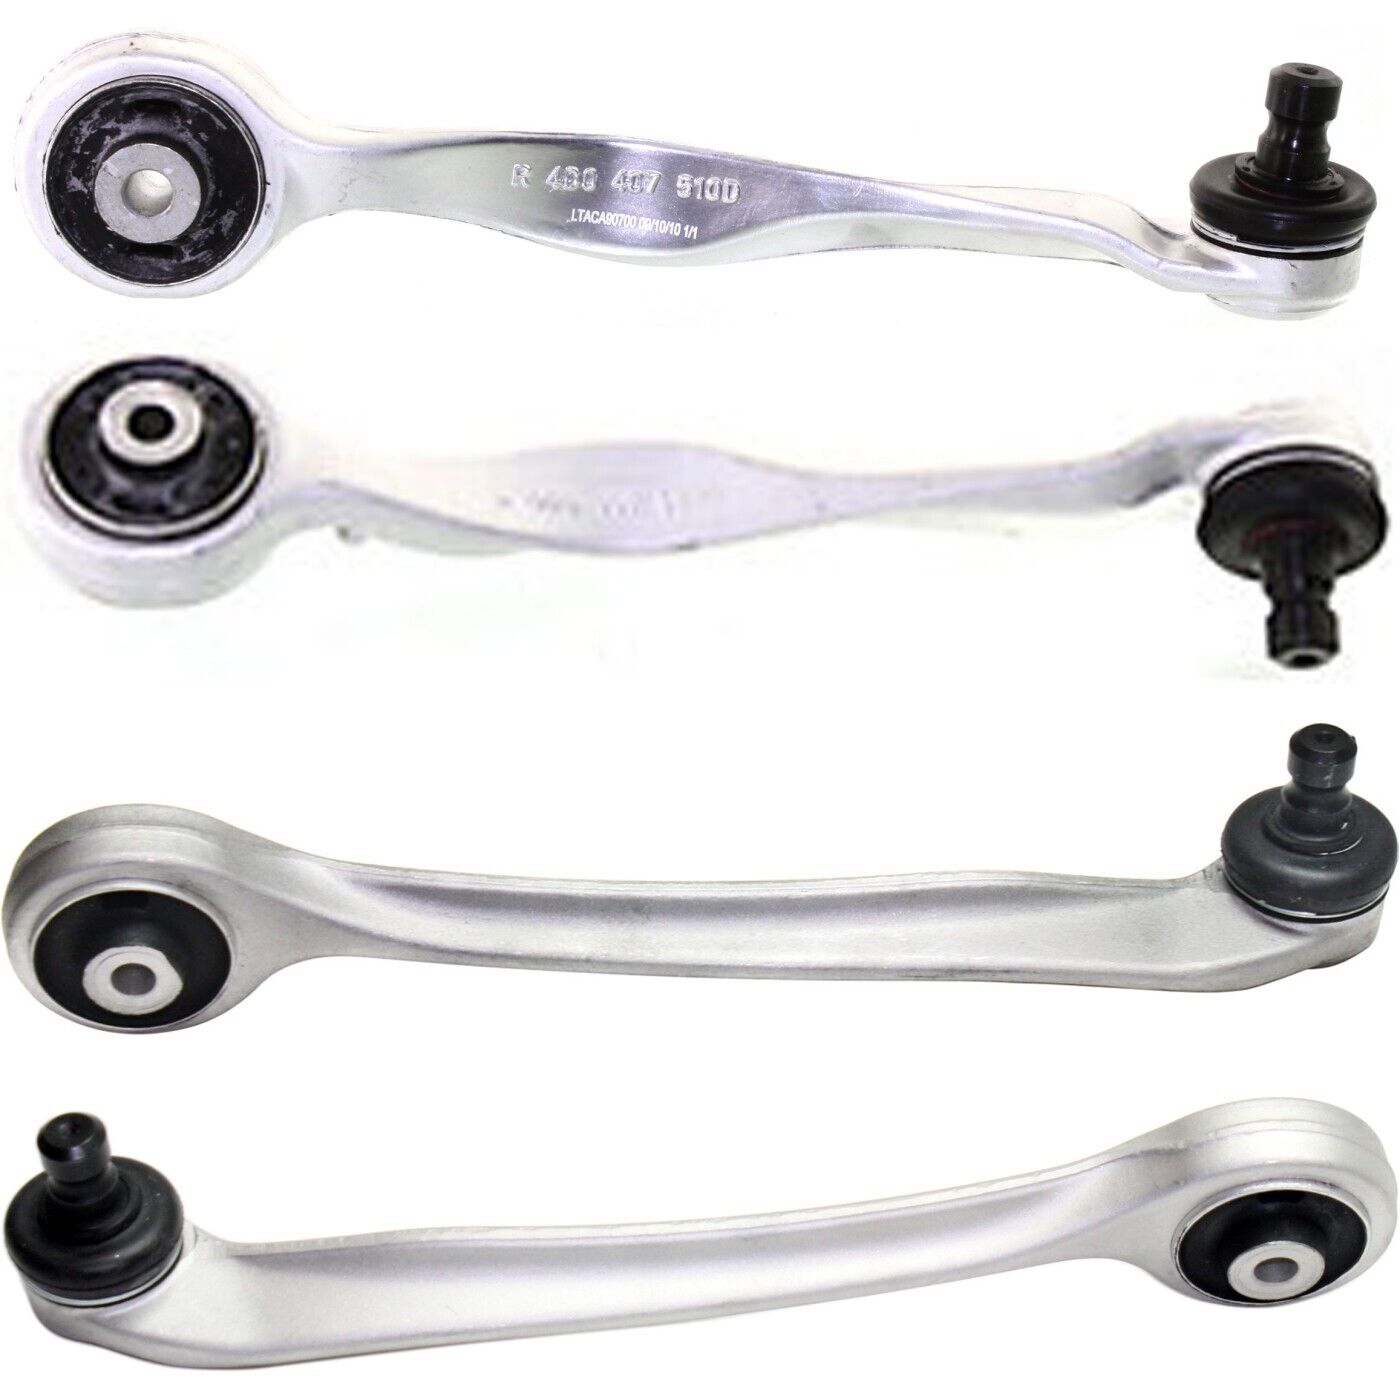 Front Upper Control Arms Kit Set of 4 for Audi A4 A6 S4 Volkswagen Passat